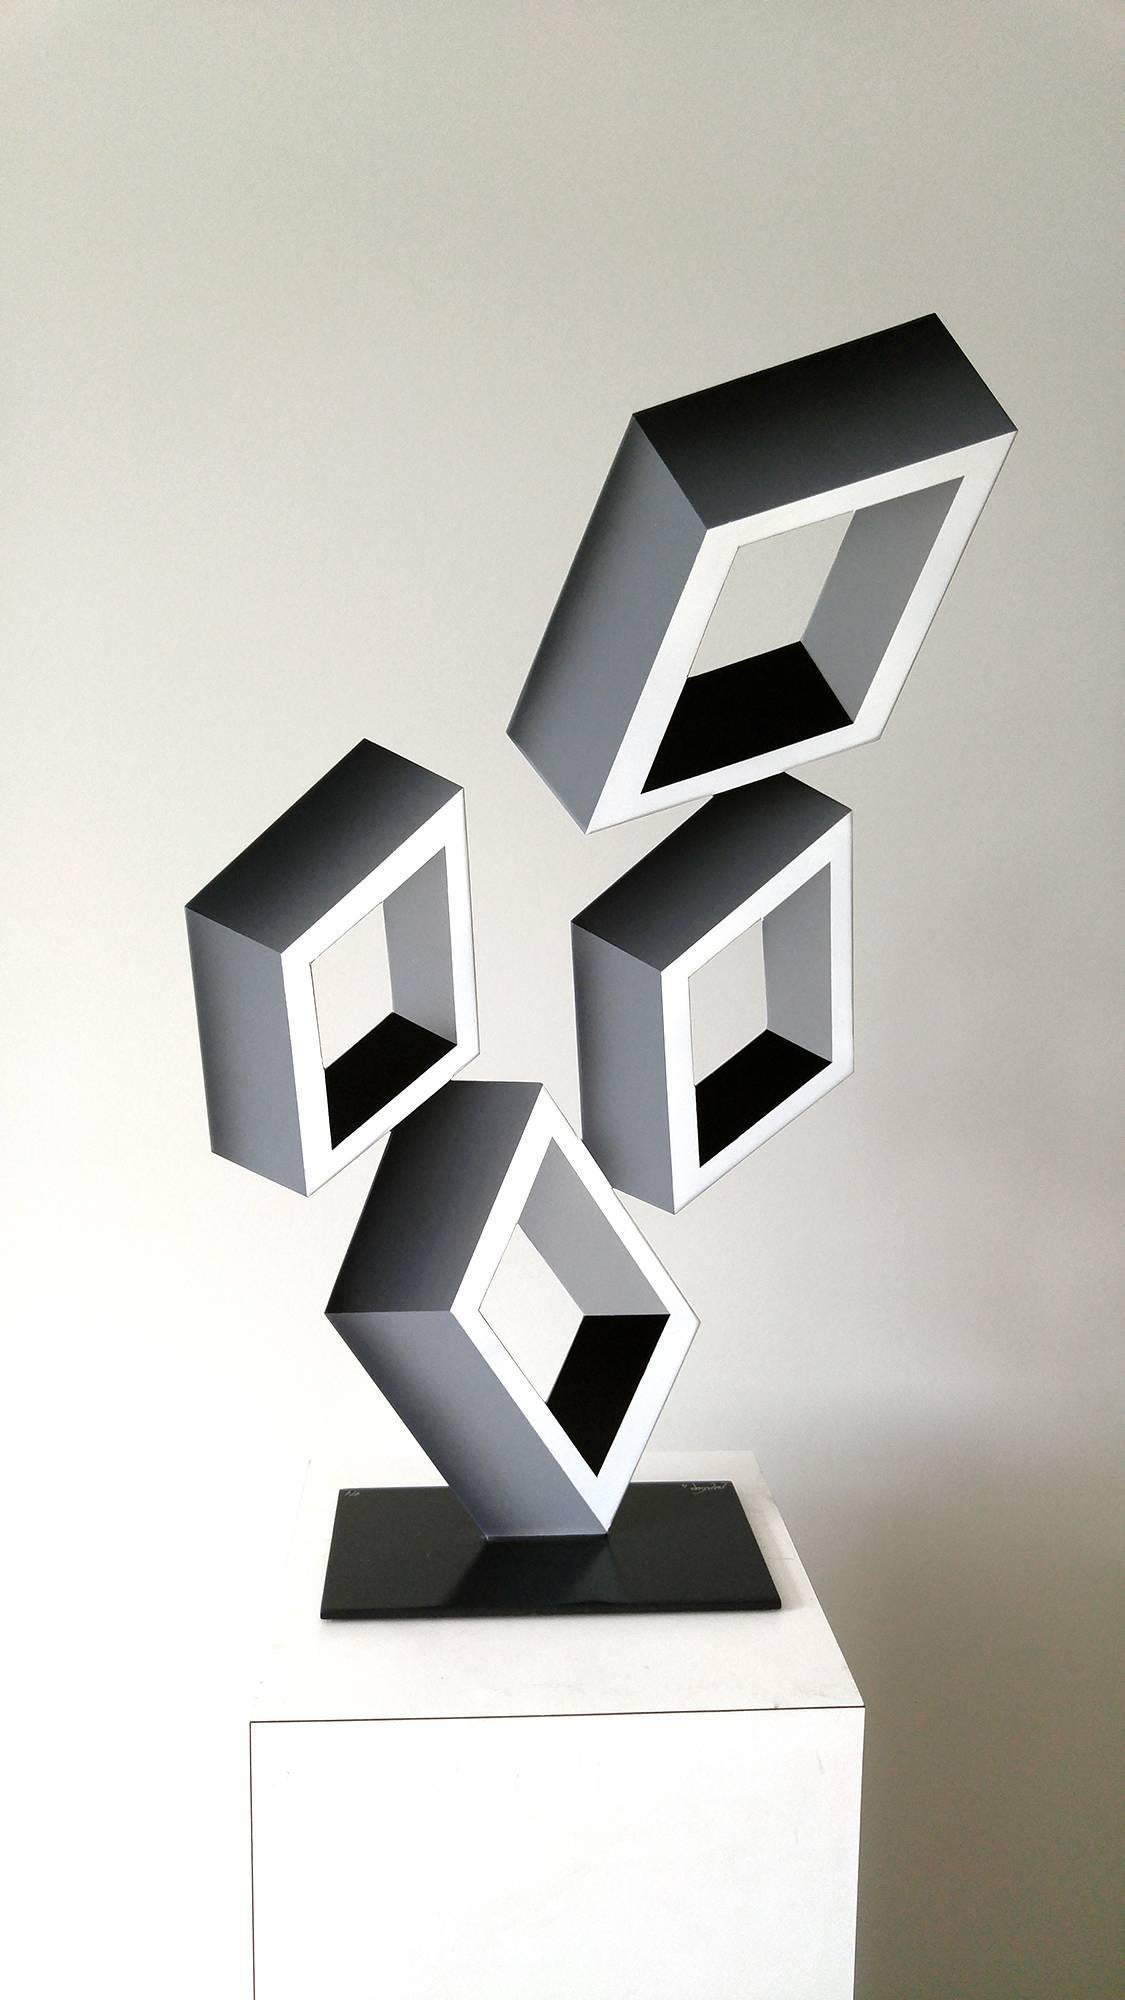 Sanseviero Abstract Sculpture - "4 White Boxes", illusion sculpture, painted metal